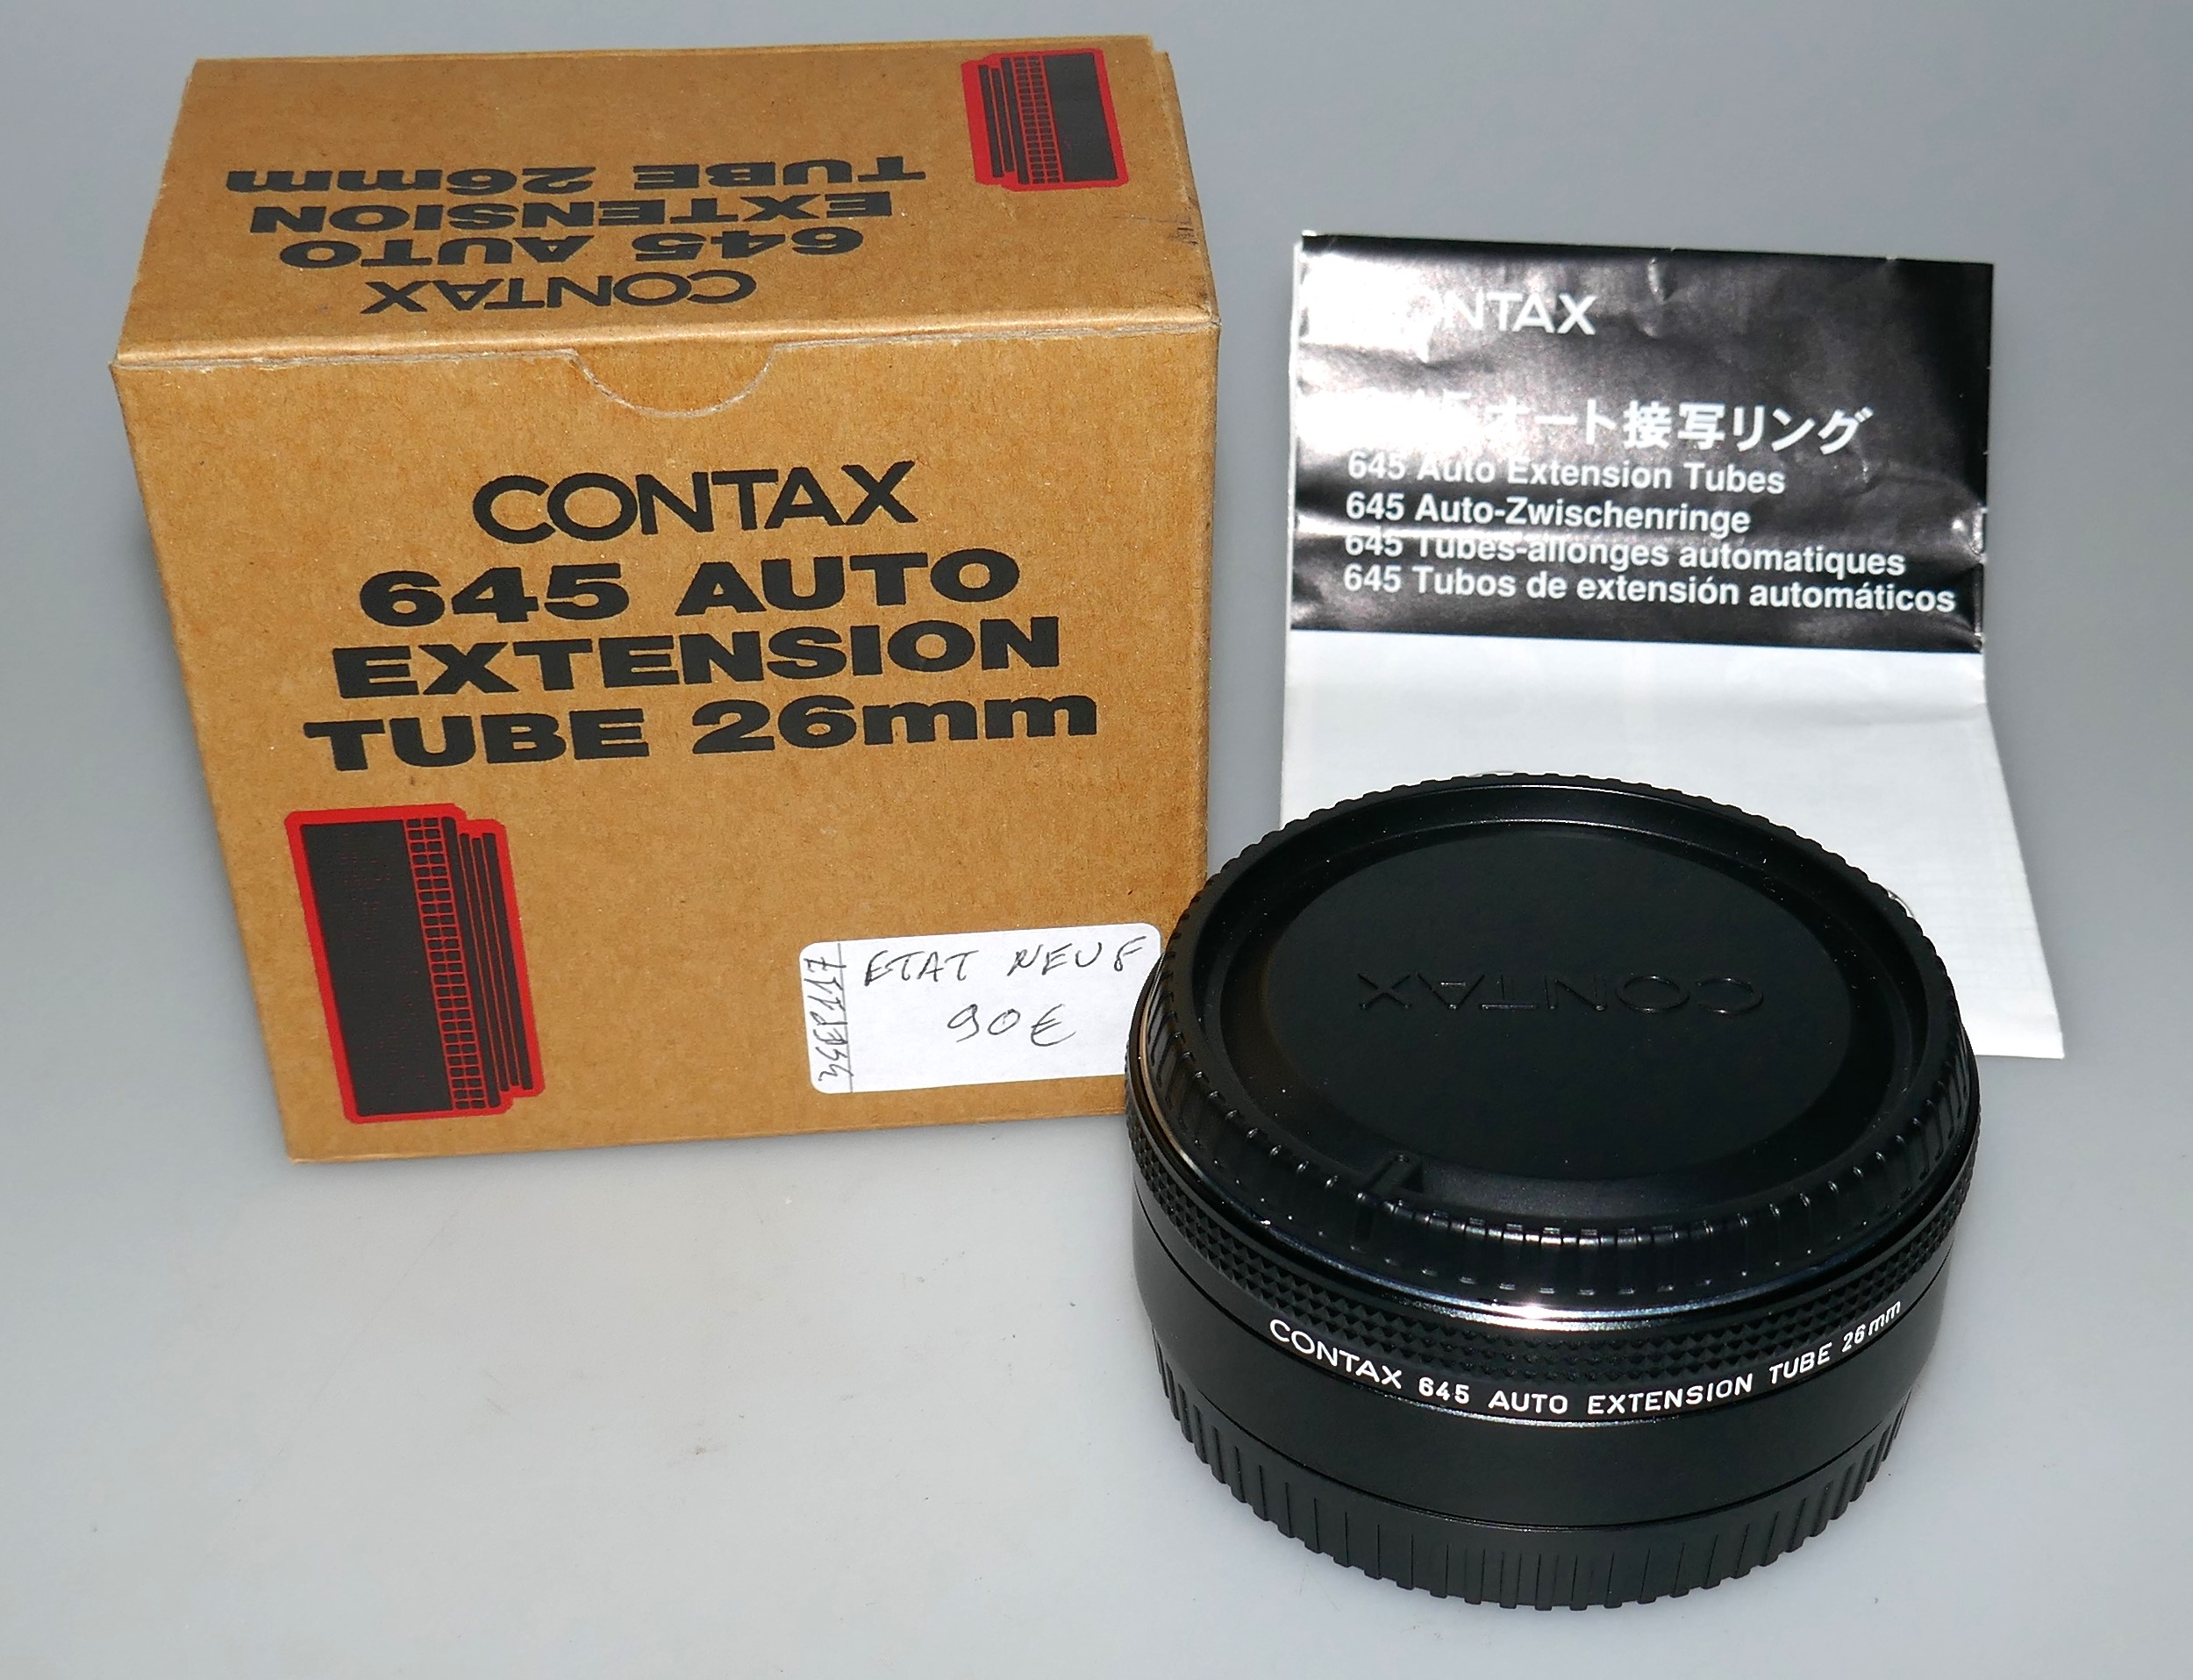 Contax 645, CONTAX QUICK SHOE ADAPTER AT-1, BOX, MINT, CONTAX AUTO